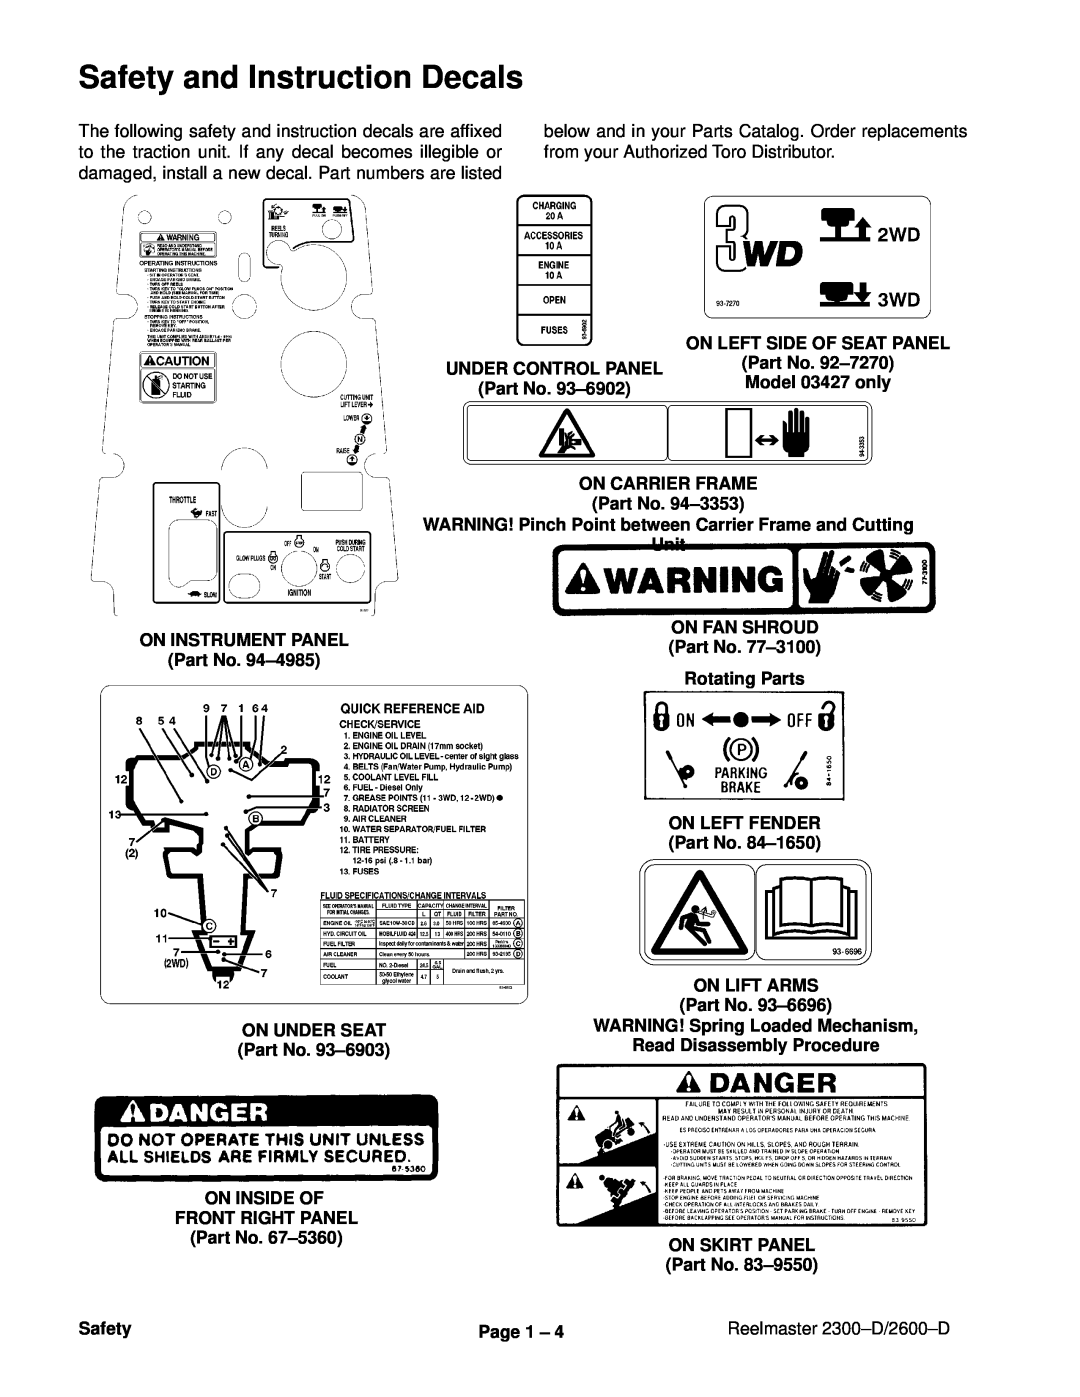 Toro 2300-D Safety and Instruction Decals, ON INSTRUMENT PANEL Part No. 94±4985 ON UNDER SEAT Part No. 93±6903, Page 1 ± 